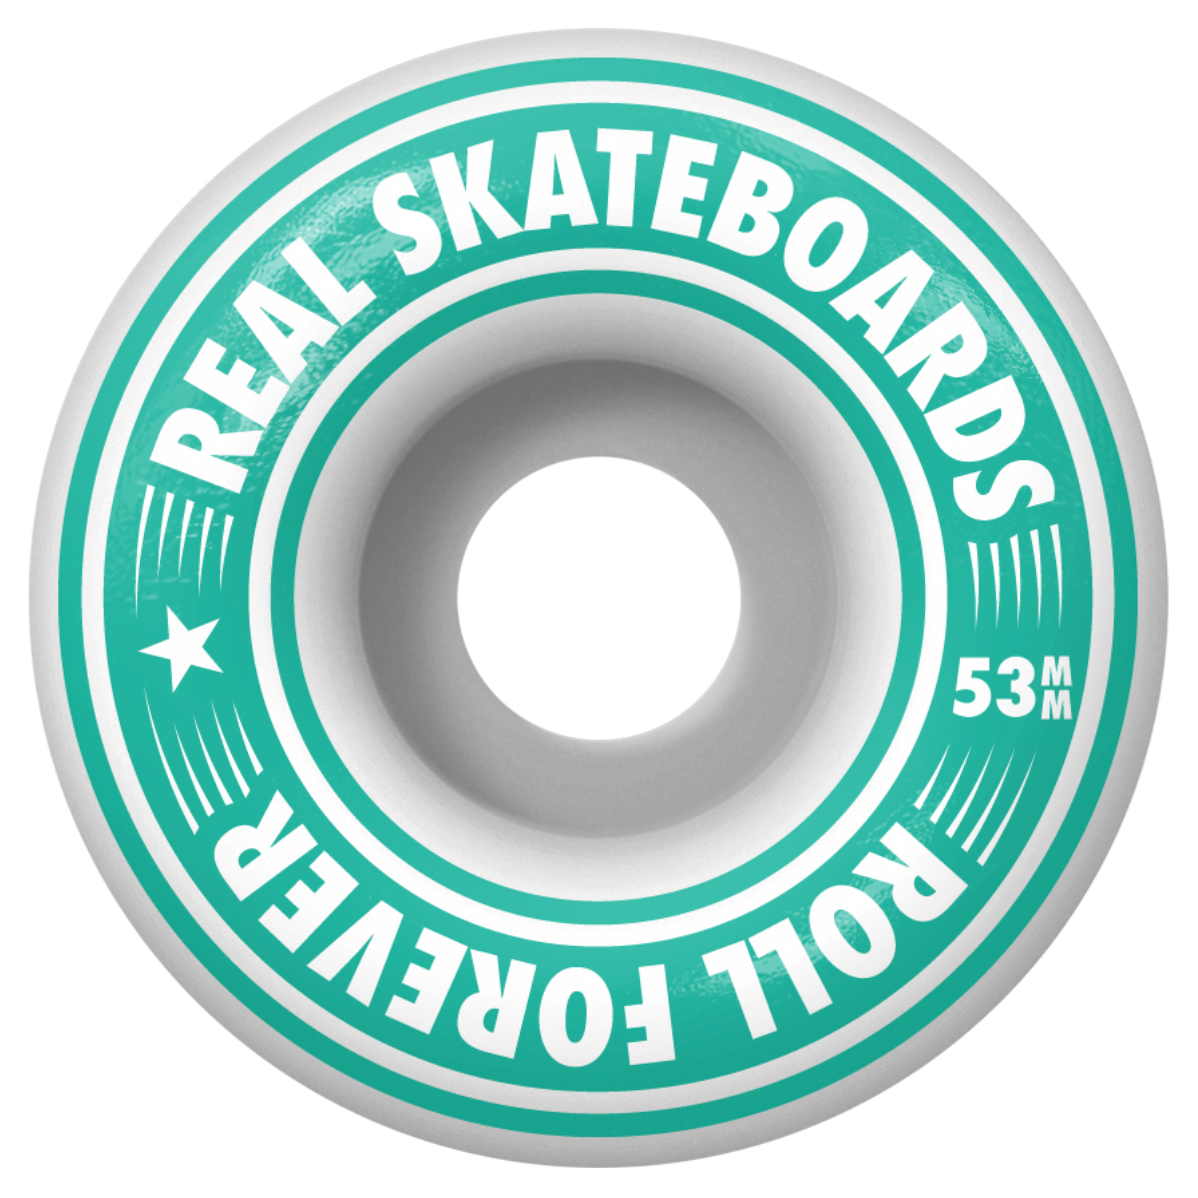 REAL COMPLETE - BE FREE FADES LG (8") - The Drive Skateshop